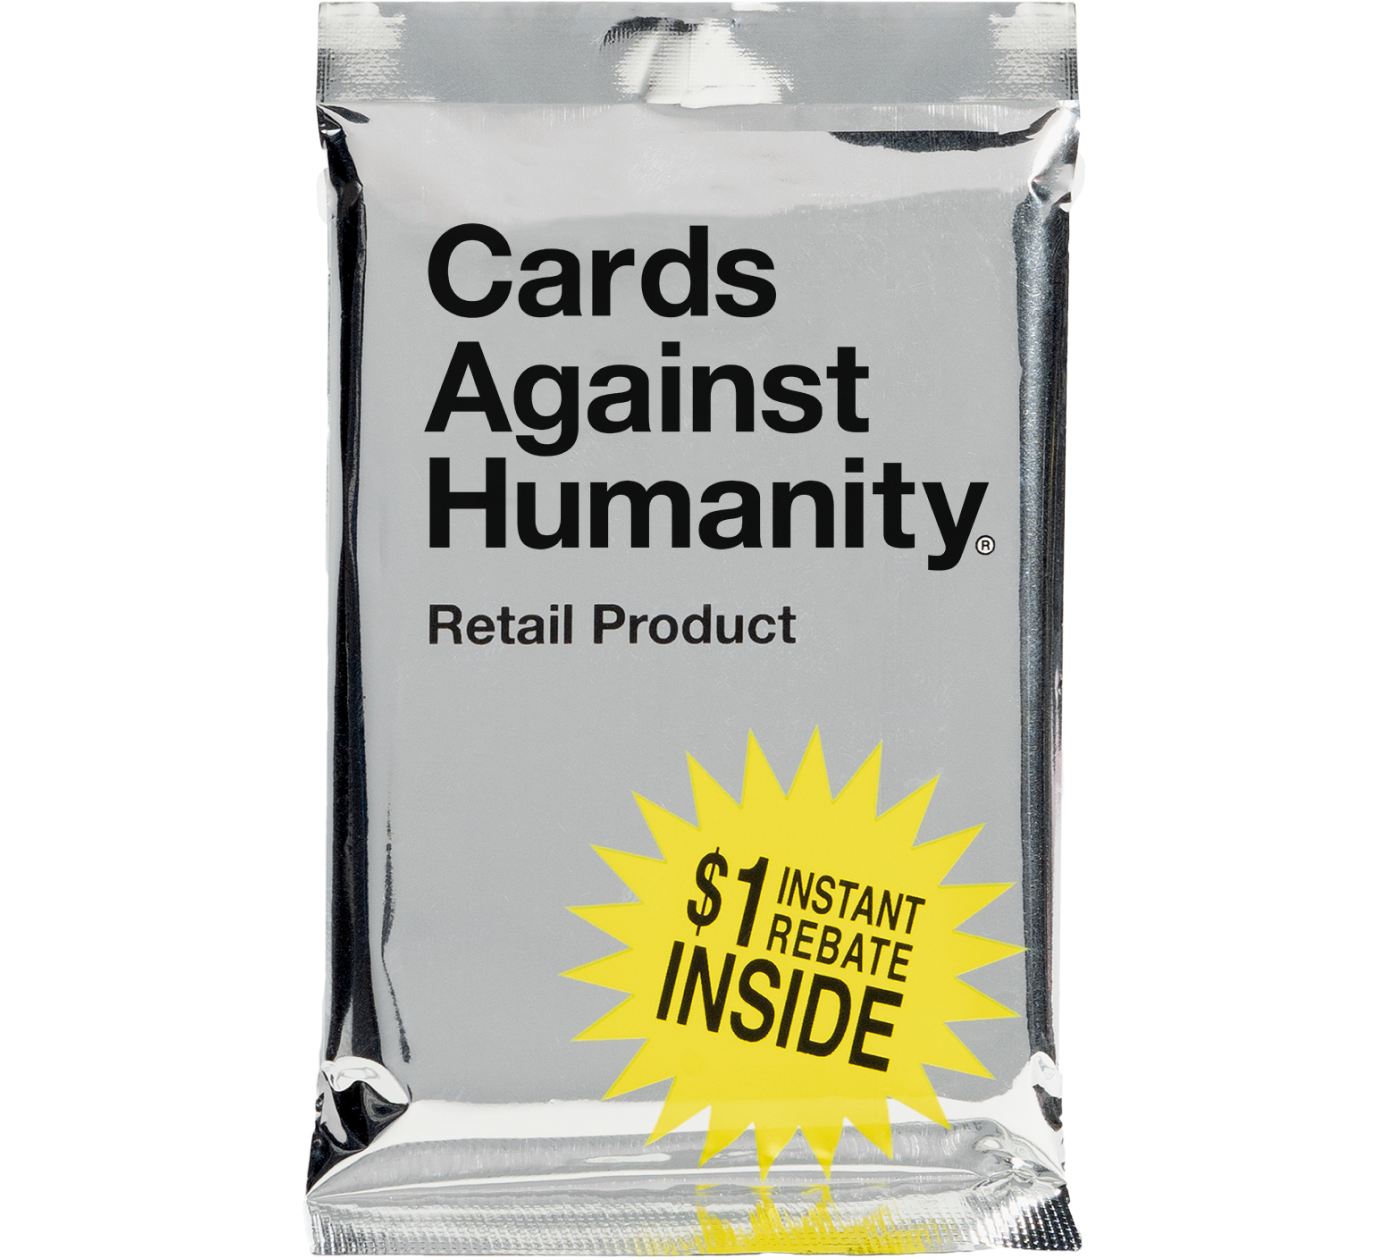 Cards Against Humanity Cards Against Humanity Retail Product Pack New & Unopened w/ $1 Rebate 